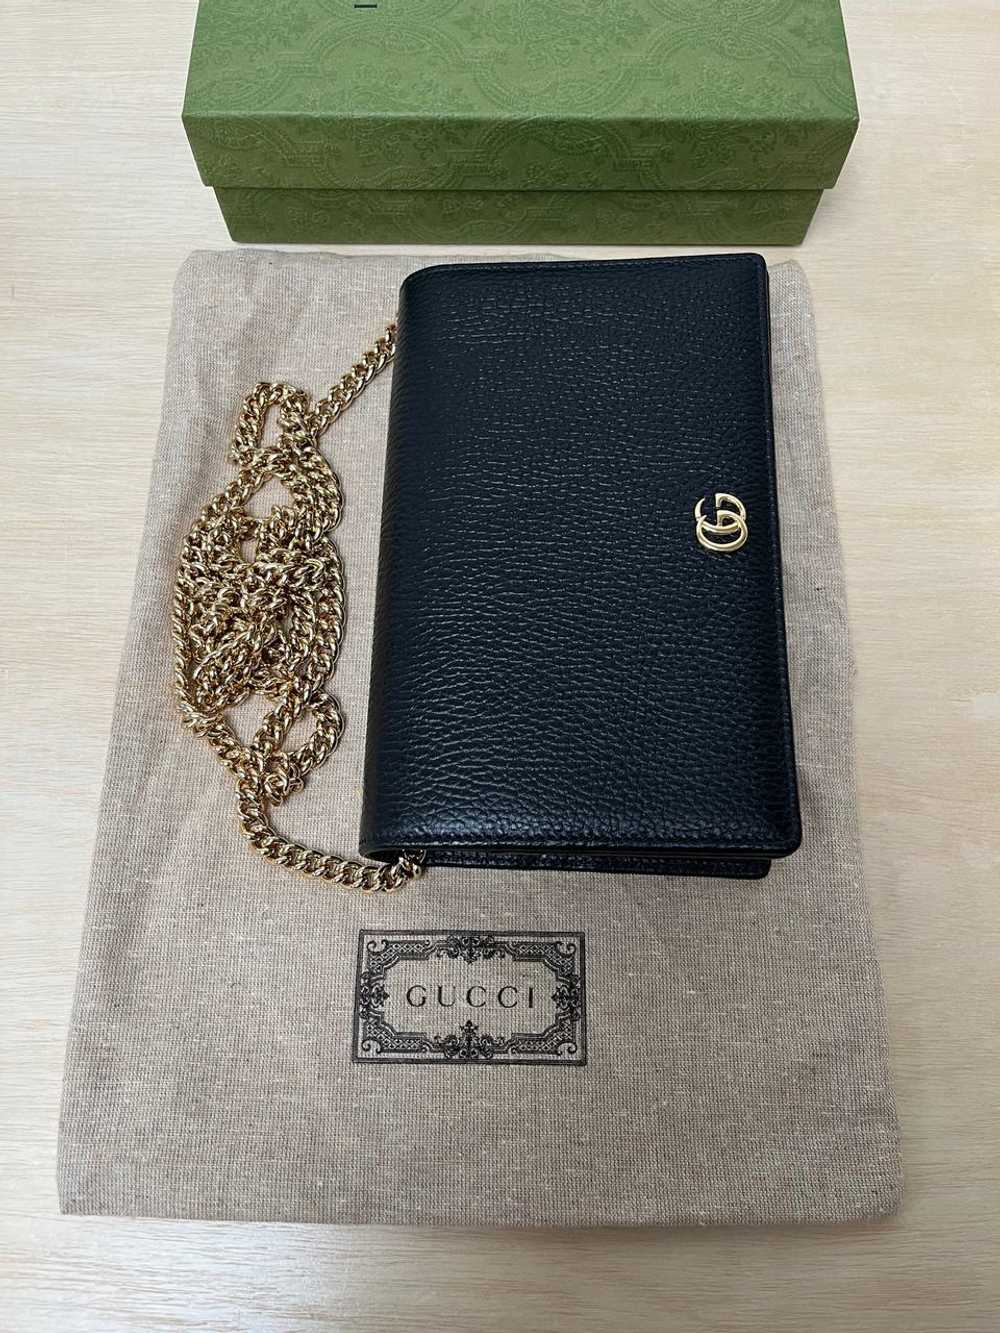 Gucci GG Marmont mini chain bag | Used, Secondhan… - image 5